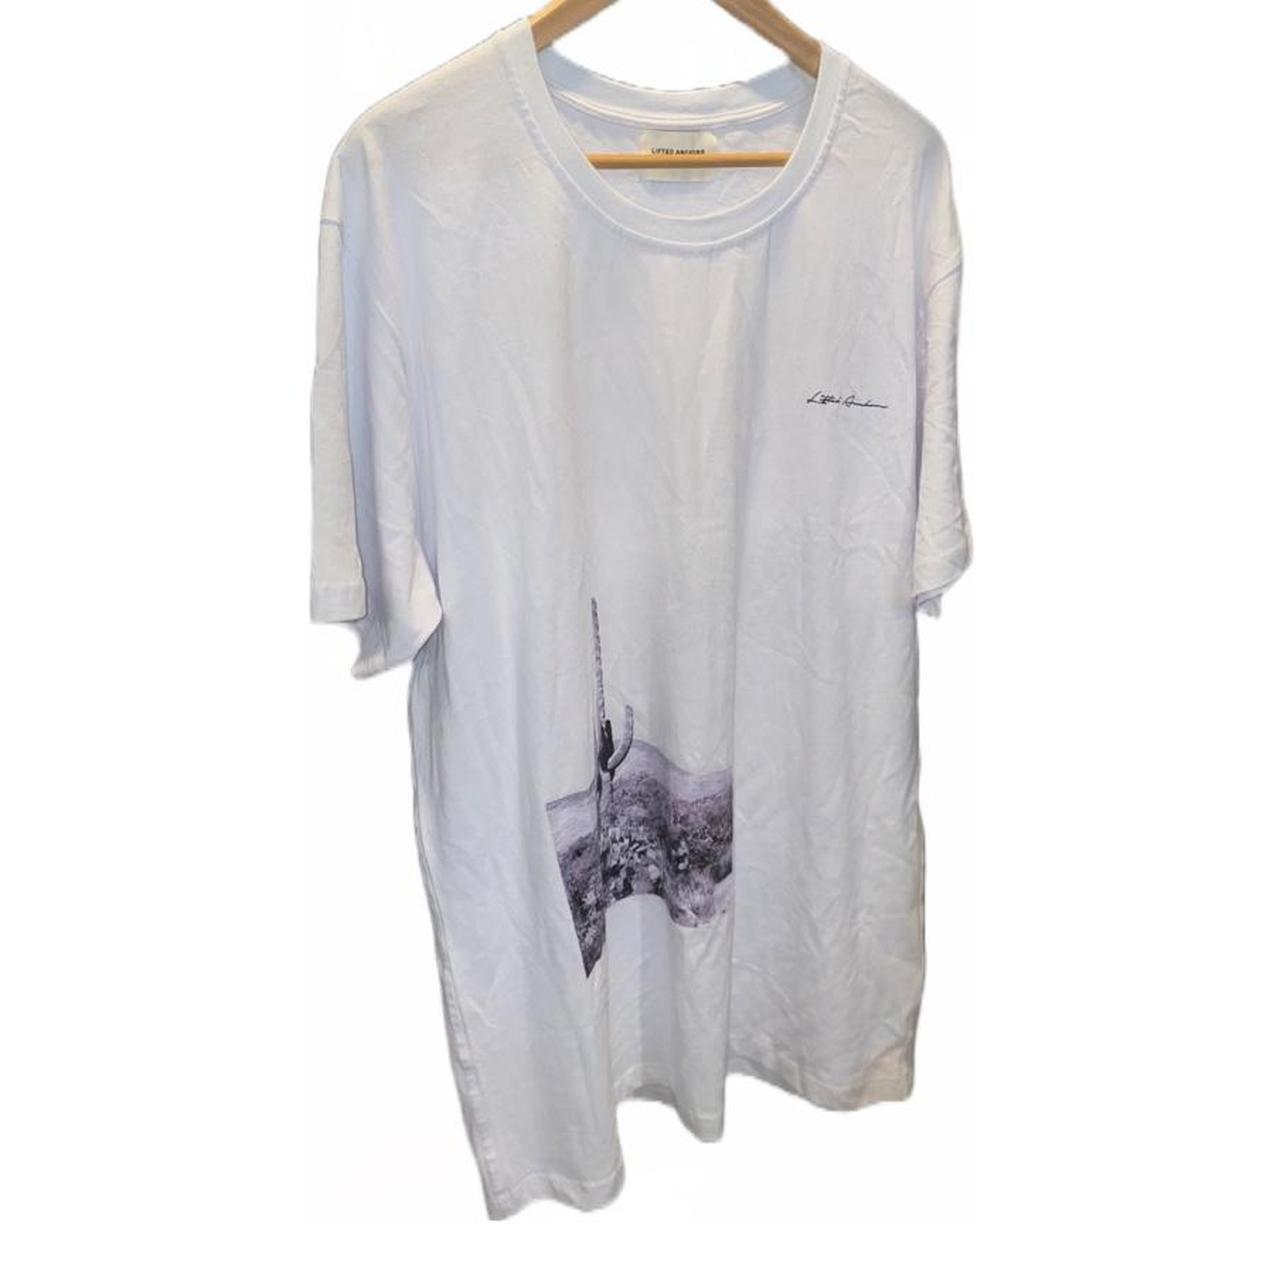 Product Image 2 - Lifted Anchors Endlessly tee shirt